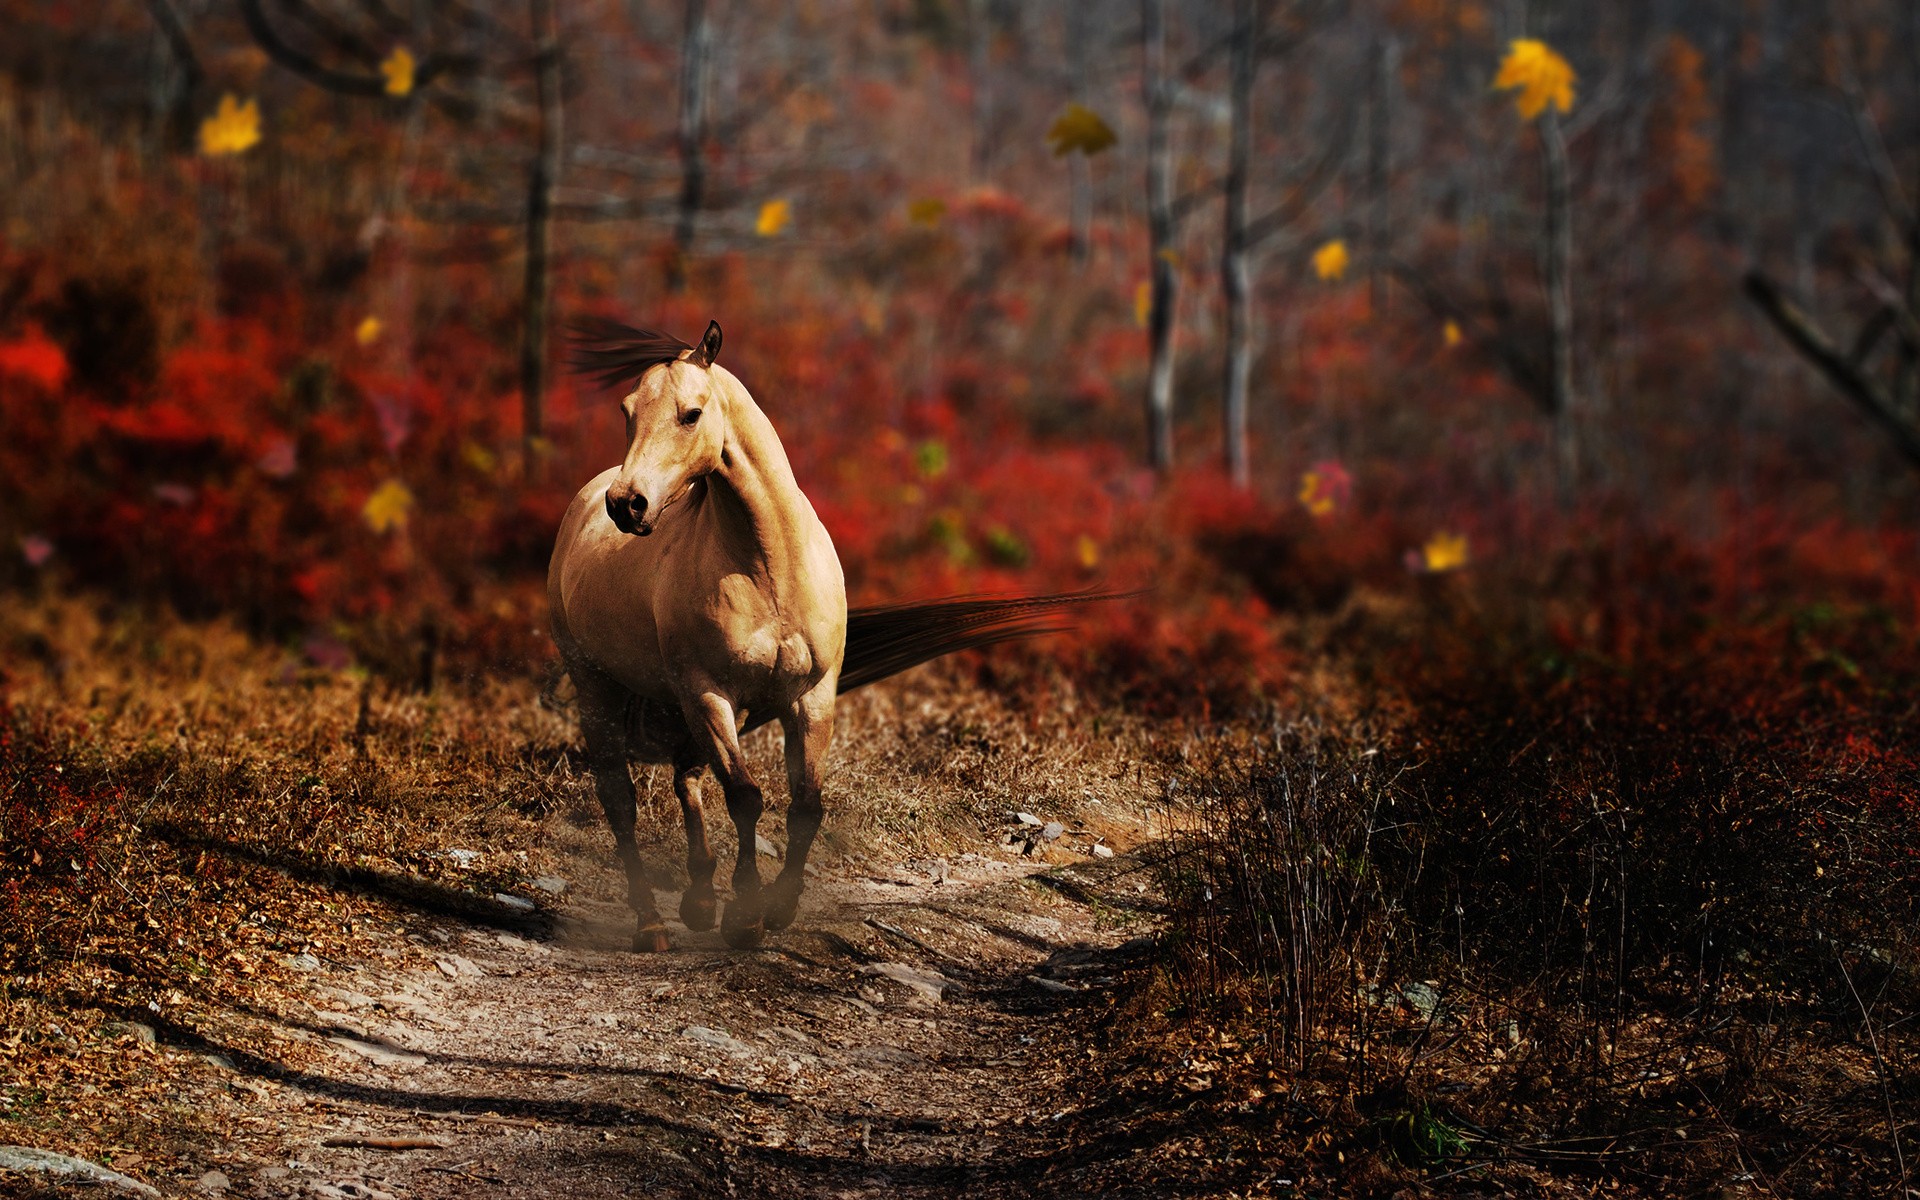 General 1920x1200 horse forest nature fall animals mammals outdoors